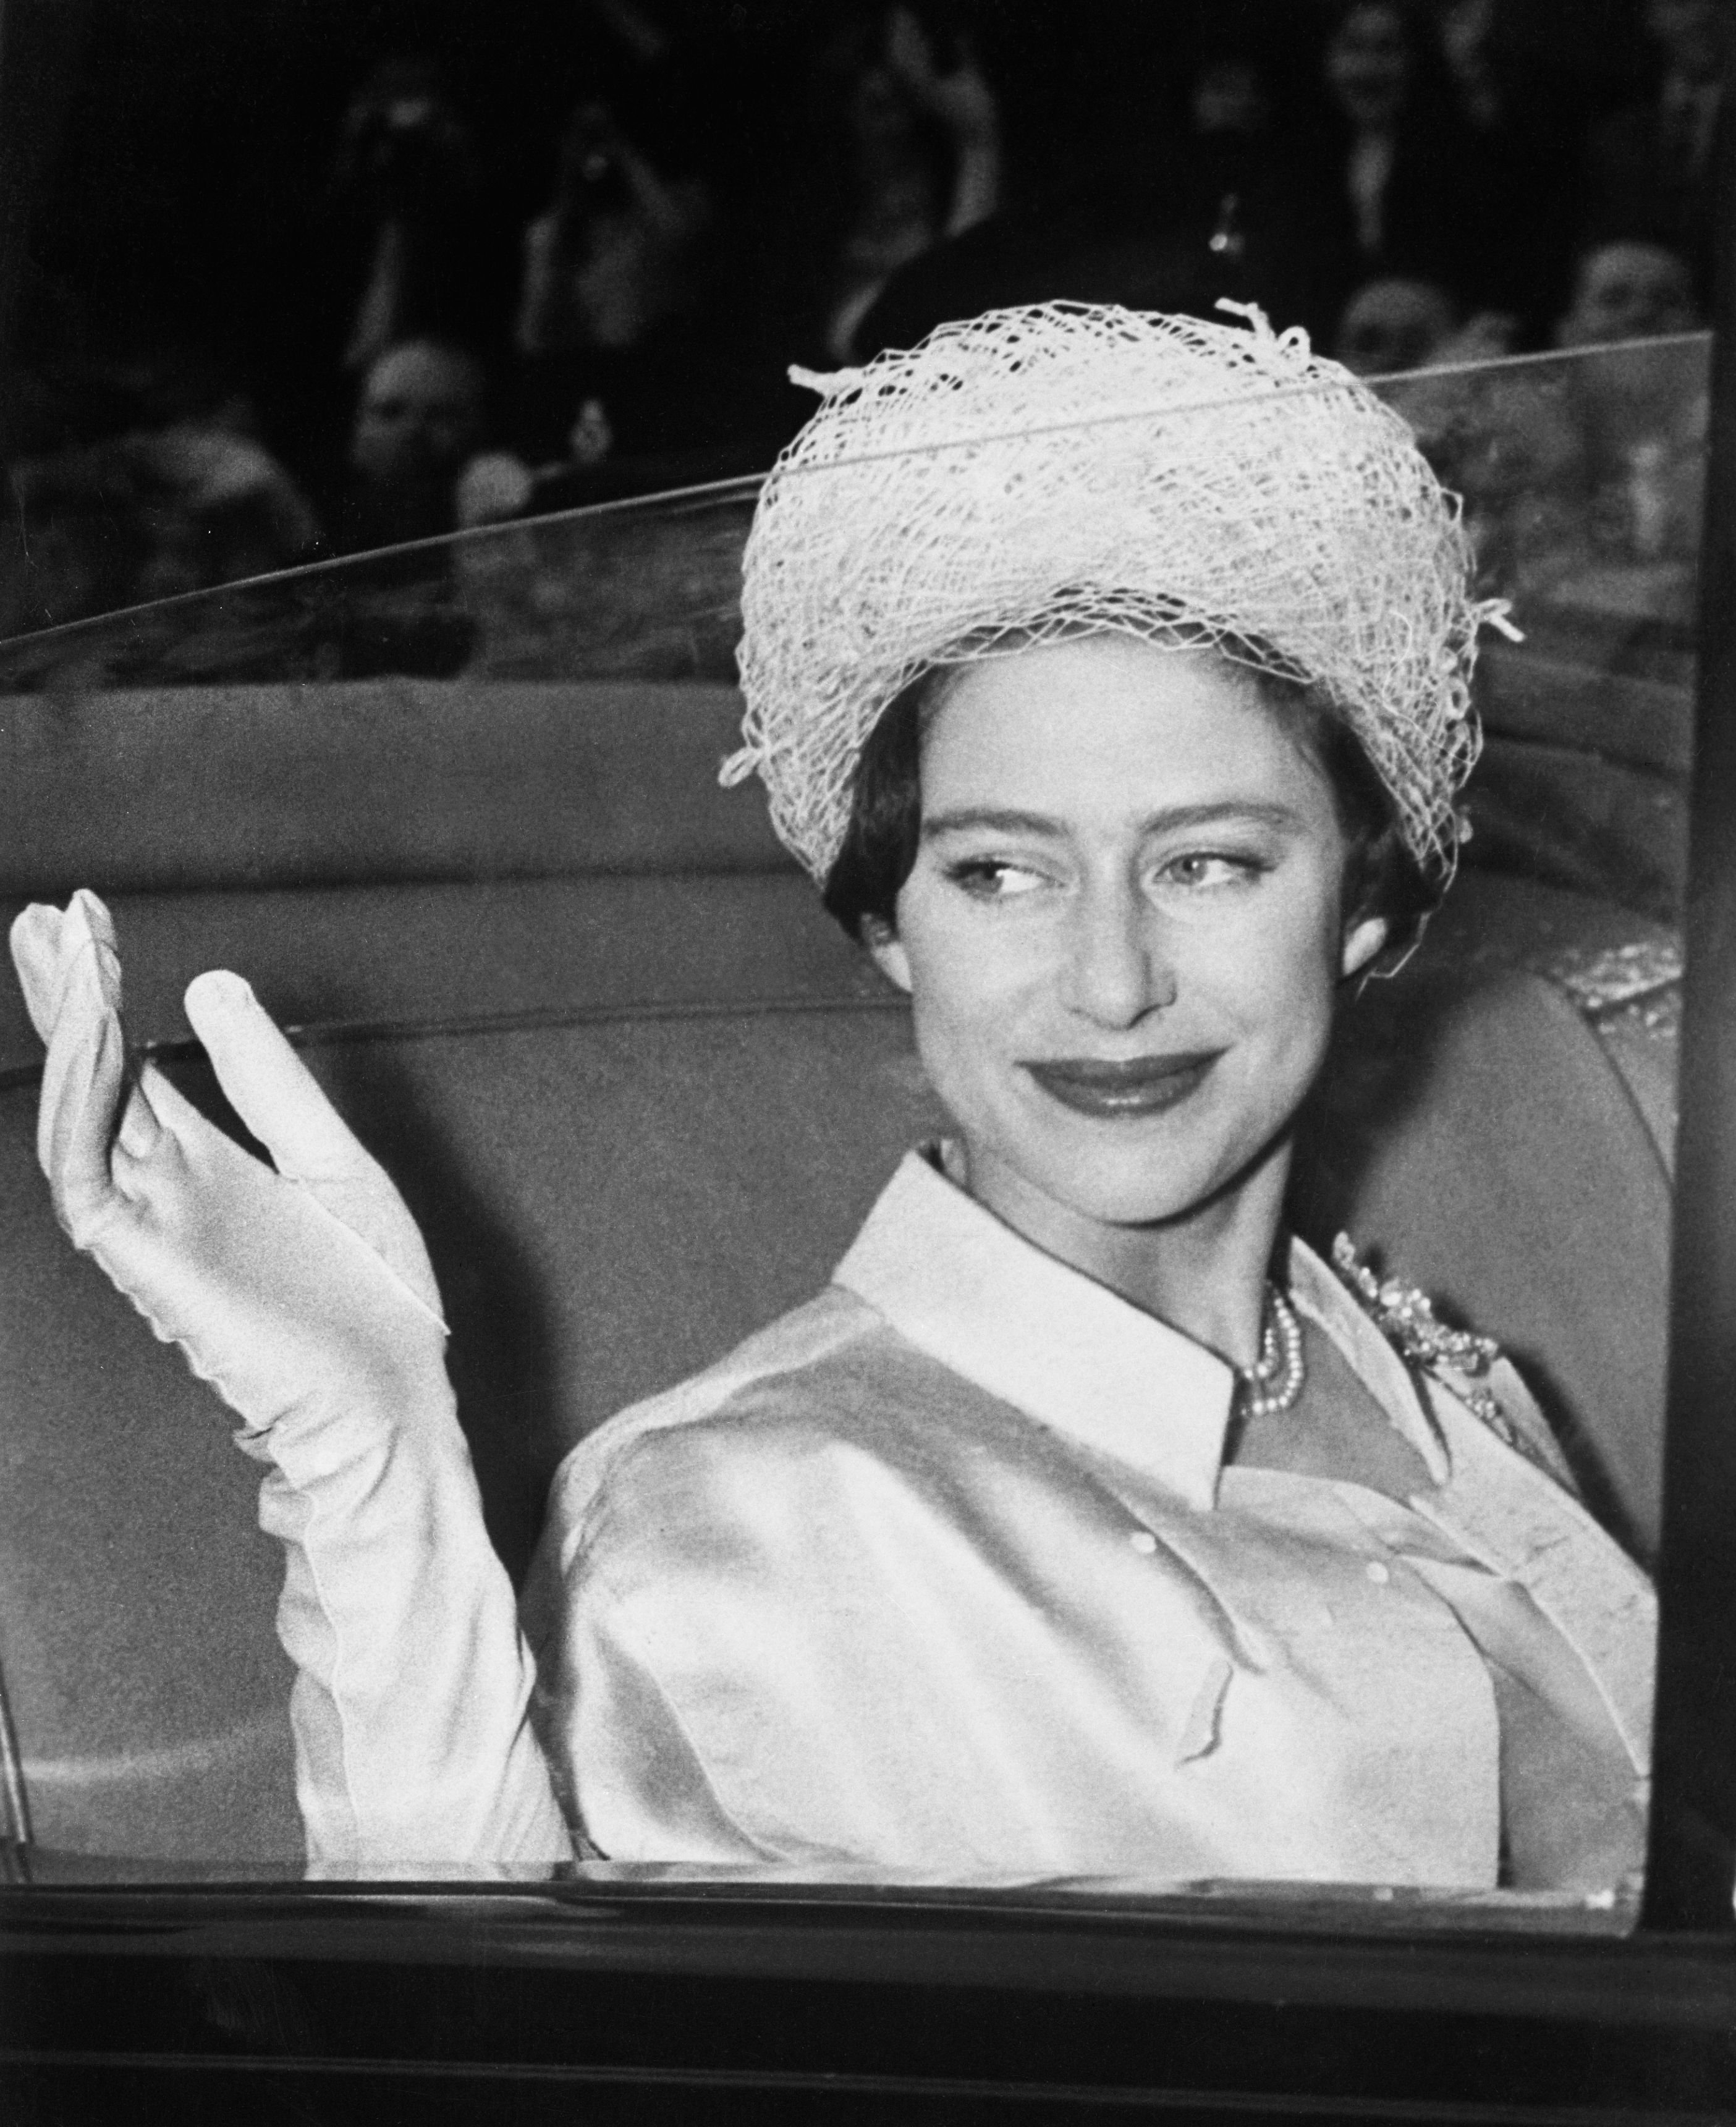 Princess Margaret waves from her vehicle at Buckingham Palace, headed for her honeymoon with Antony Armstrong-Jones. | Source: Getty Images